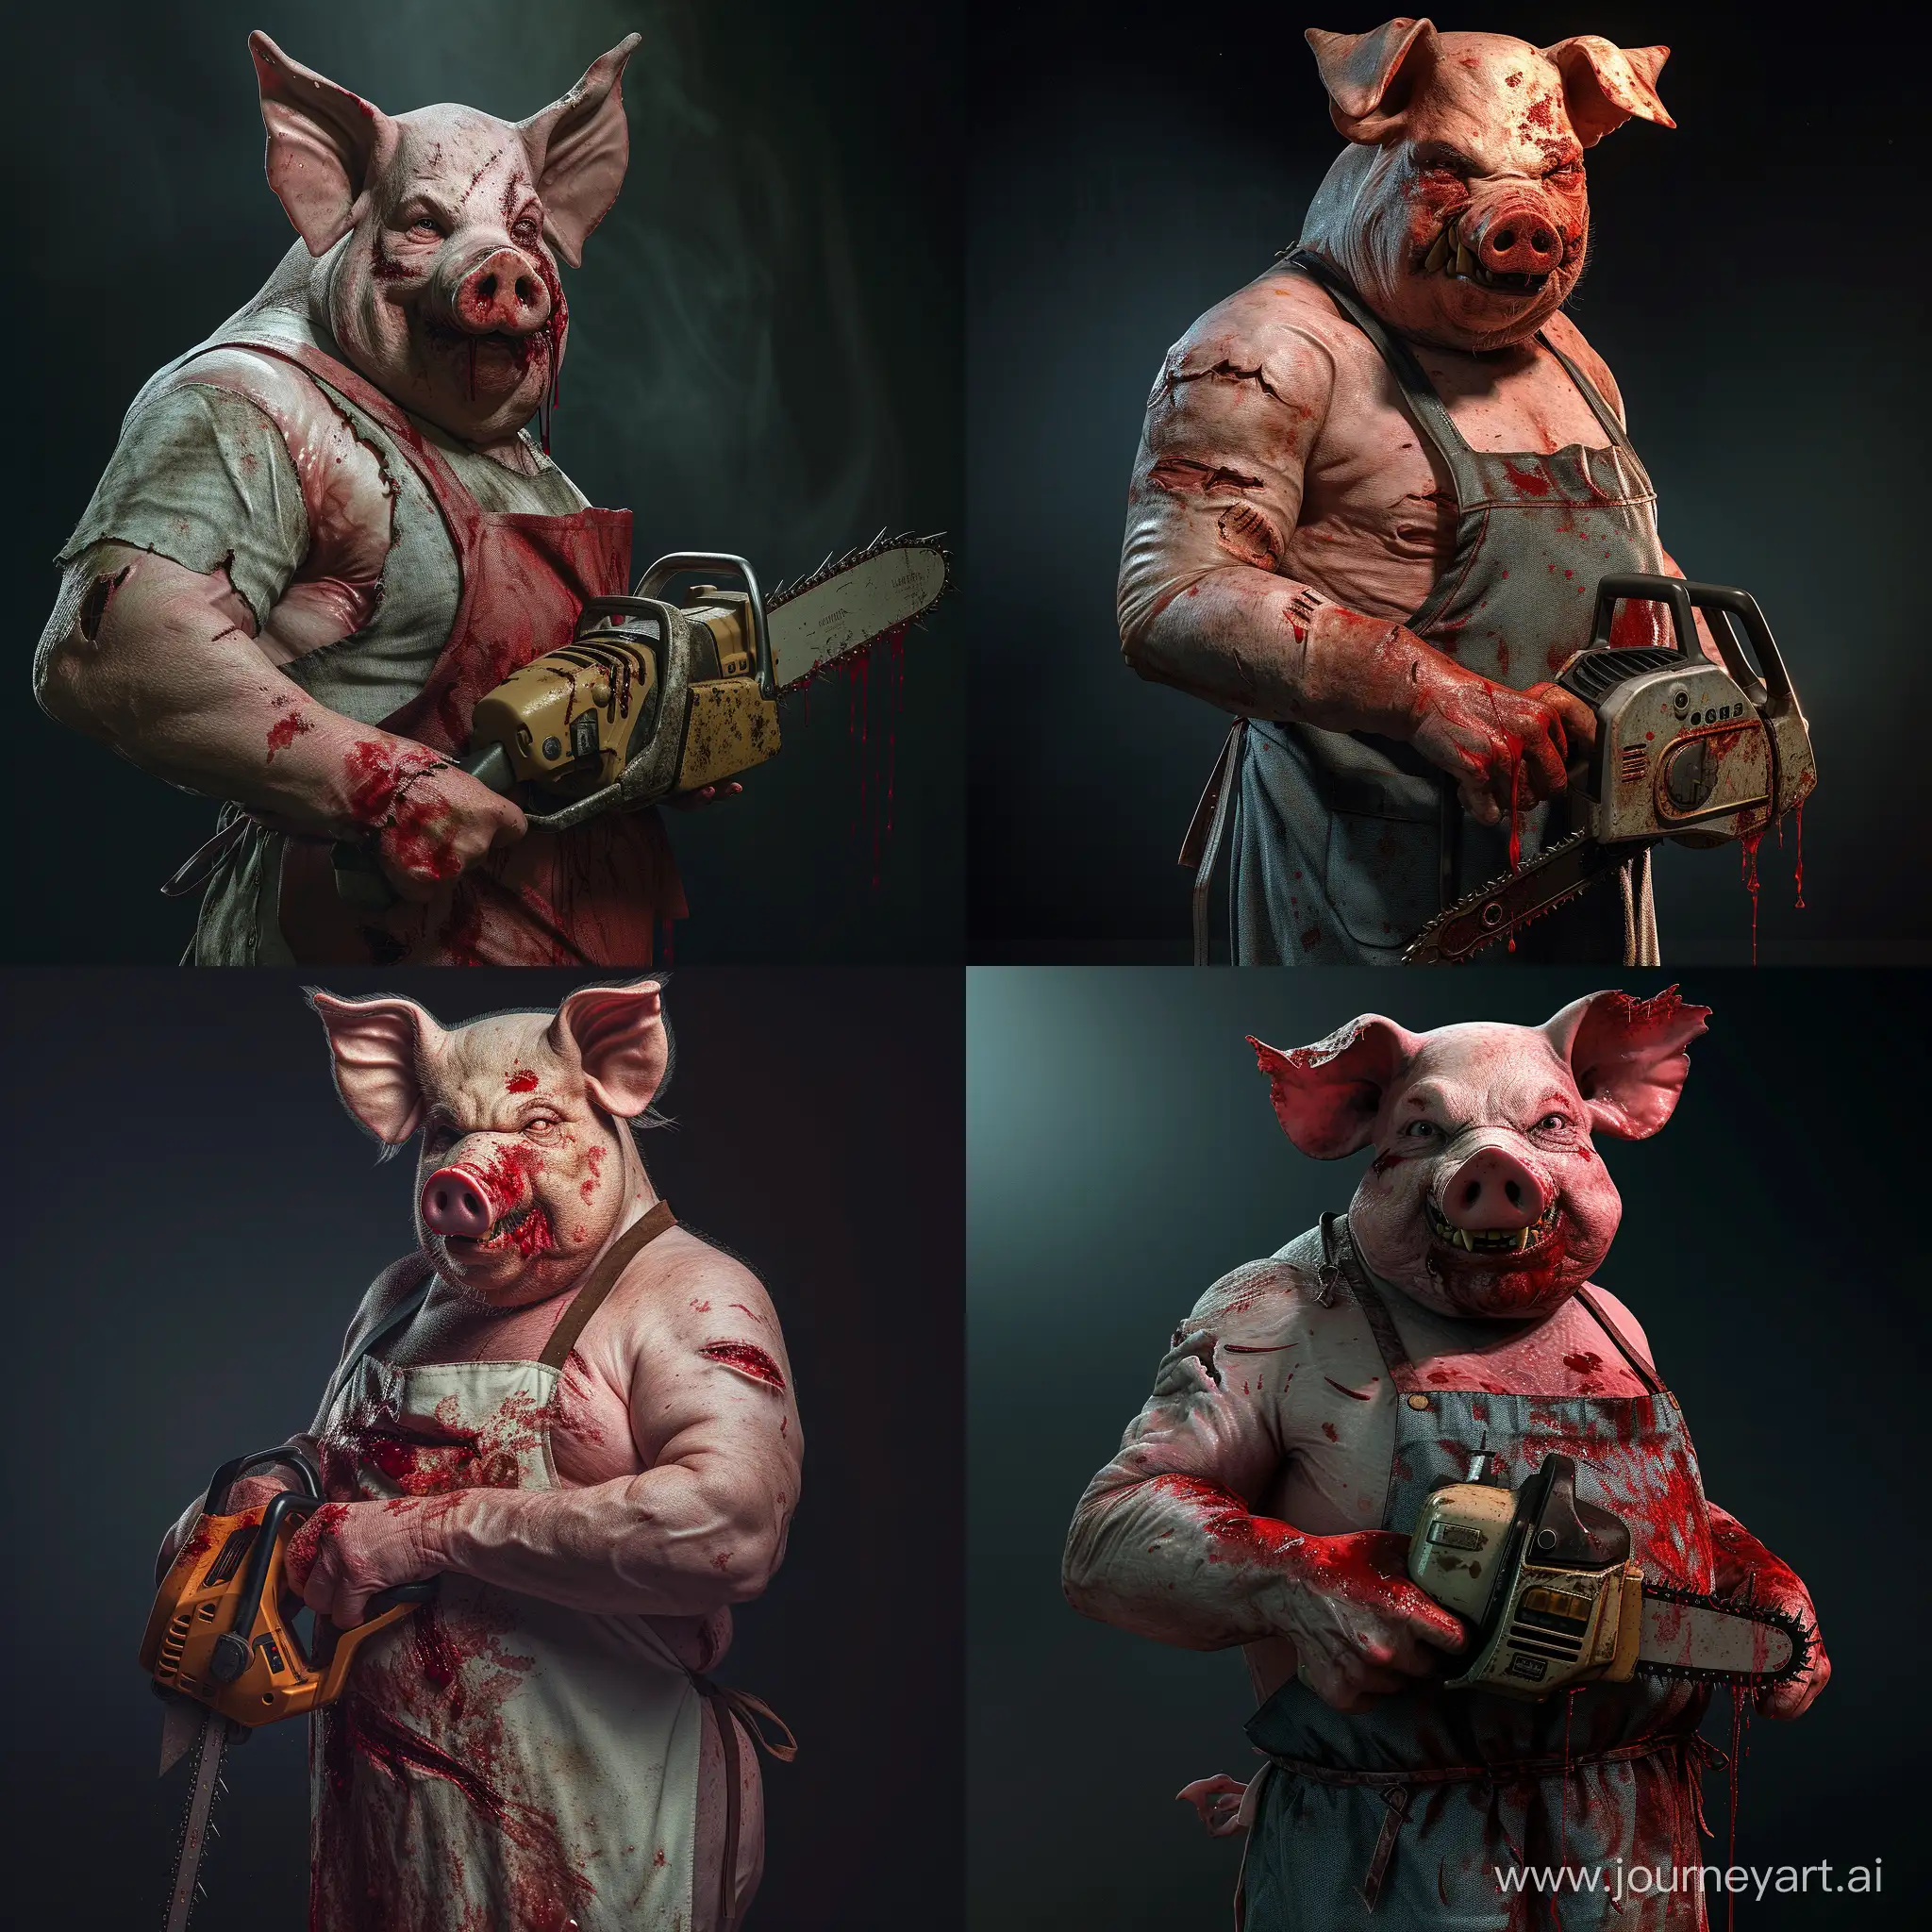 Menacing-PigMan-with-Chainsaw-in-Gruesome-Cinematic-Scene